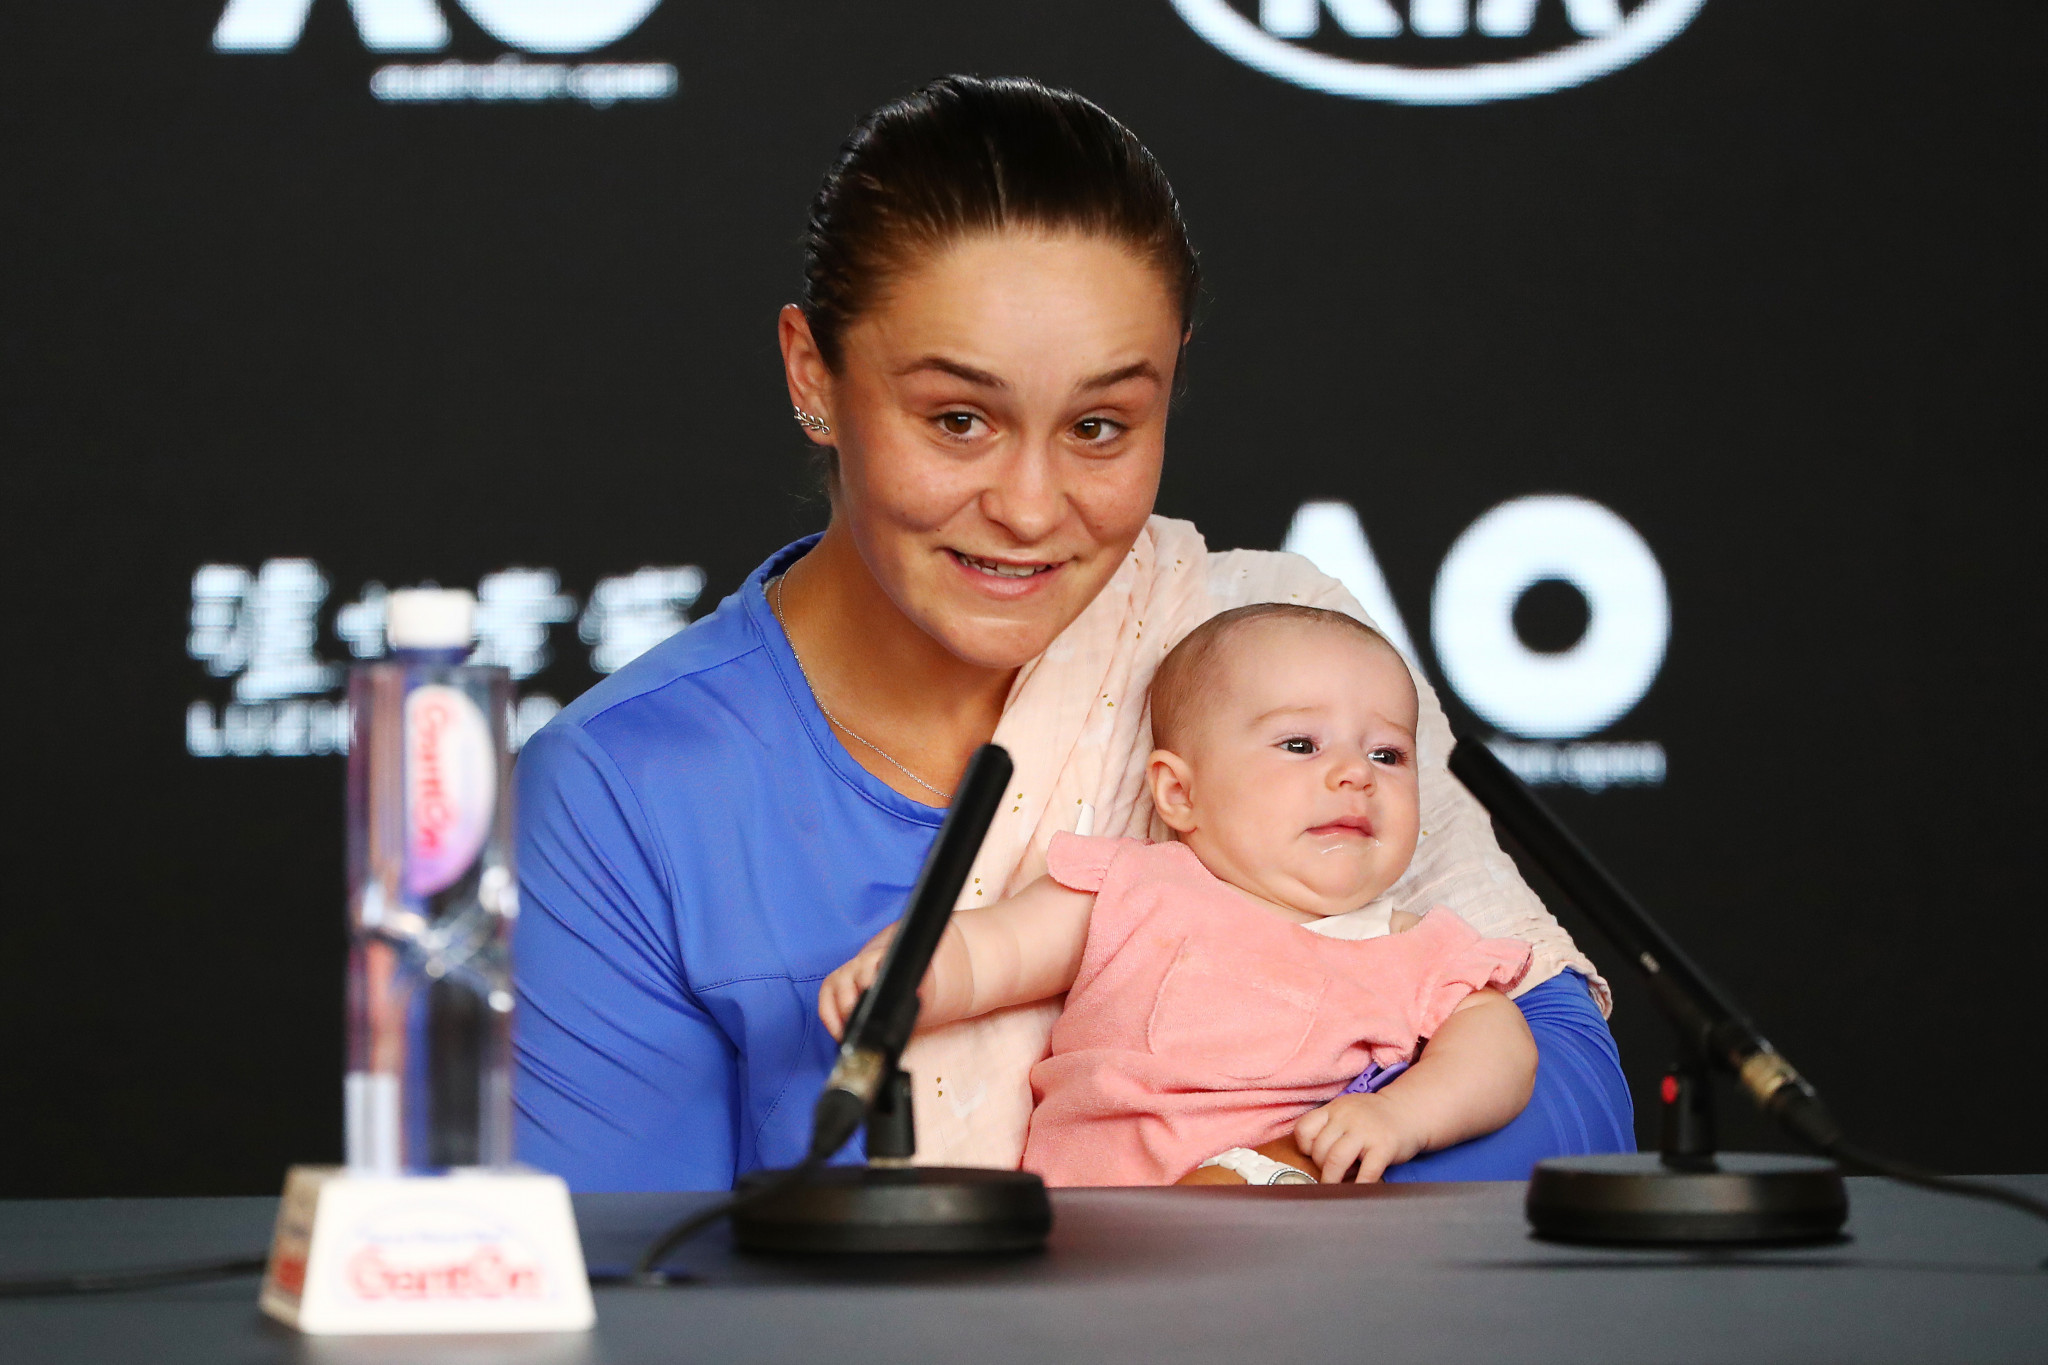 Ashleigh Barty appeared with niece Olivia after her defeat ©Getty Images